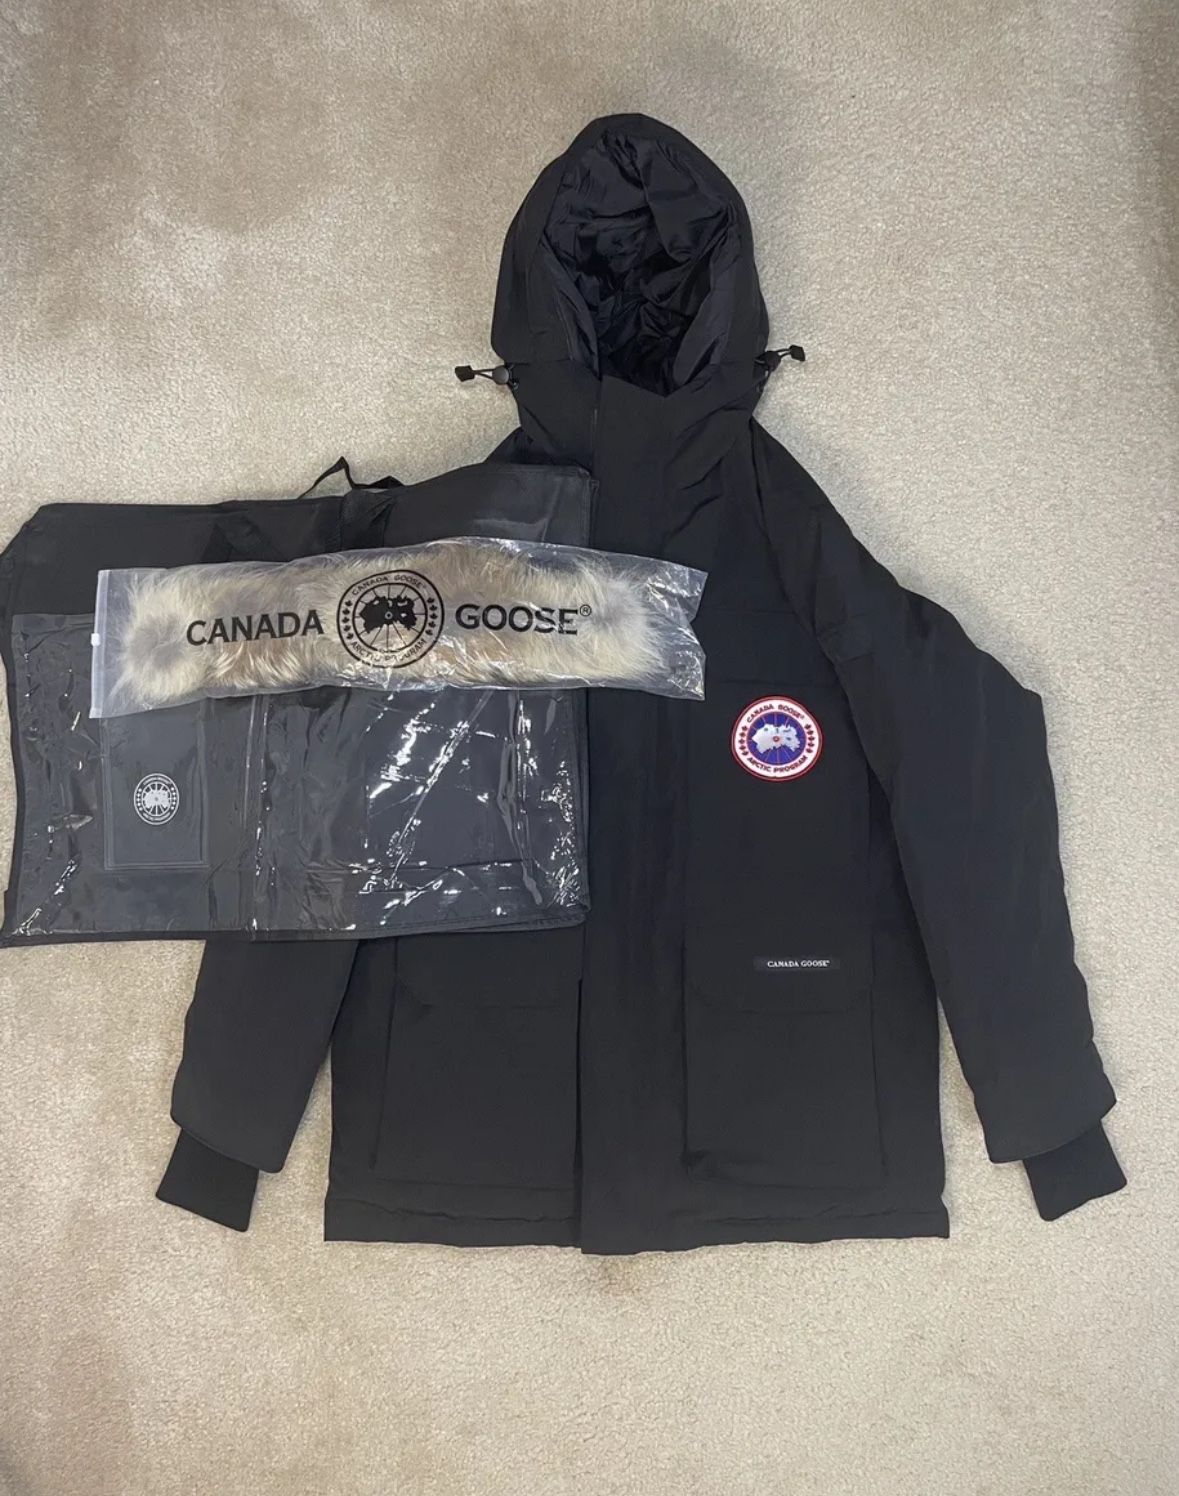 CANADA GOOSE EXPEDITION PARKA - BLACK LARGE